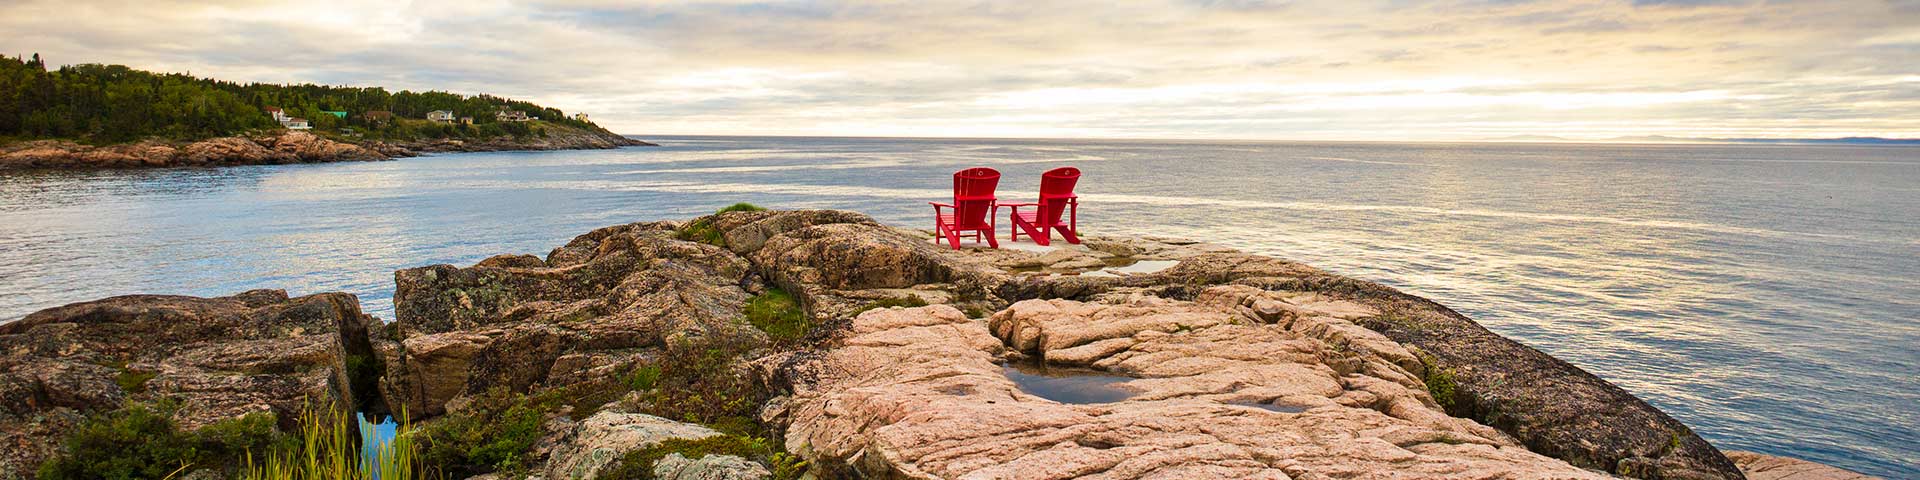 Two red chairs on an outcrop of rocks facing the ocean at Saguenay-St-Lawrence Marine Park, Quebec.